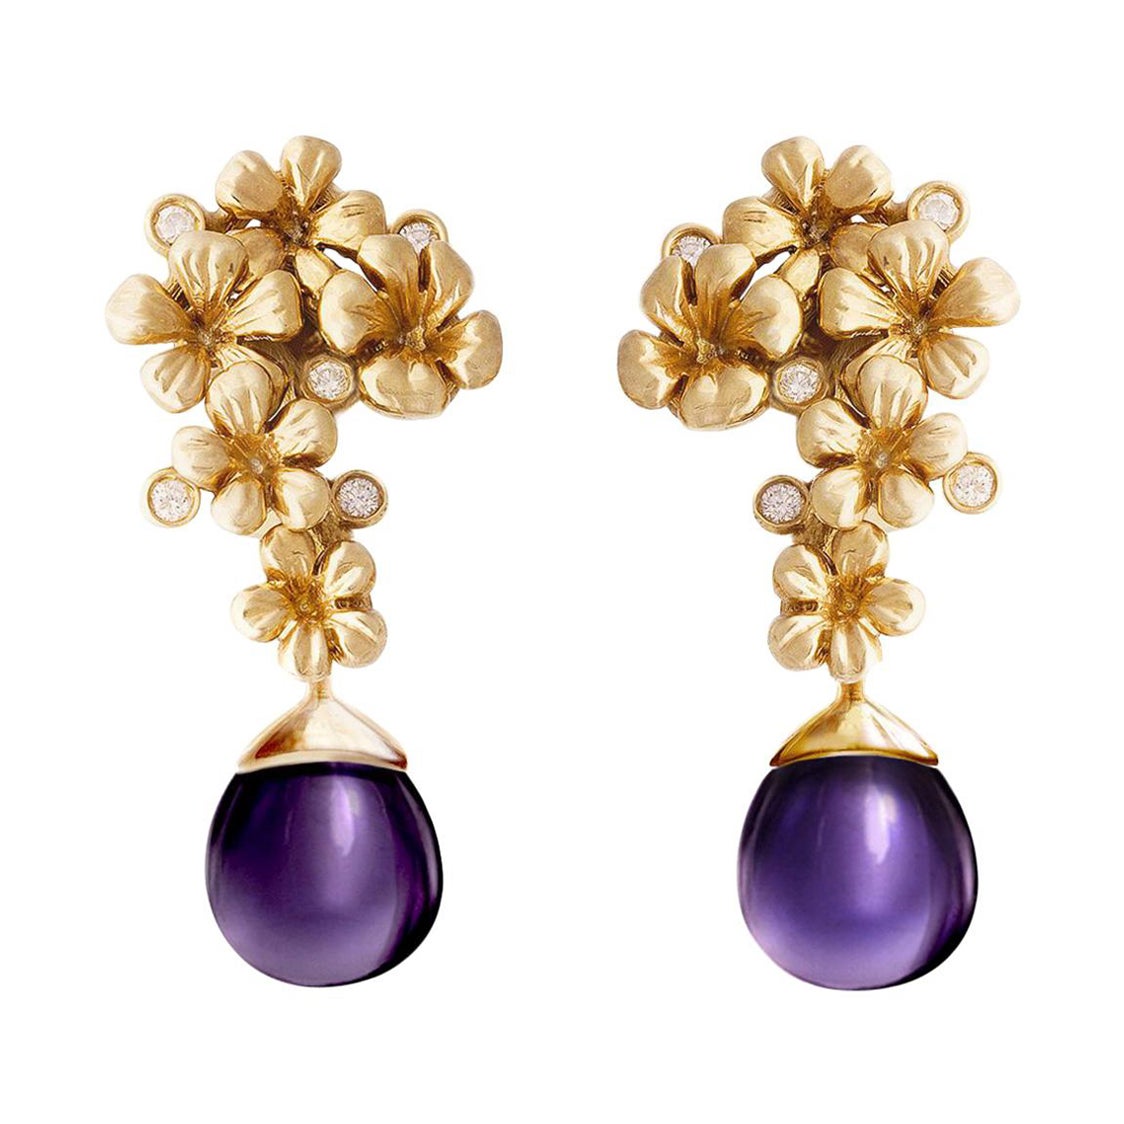 Modern Blossom Cocktail Earrings in 14 Karat Gold with Diamonds